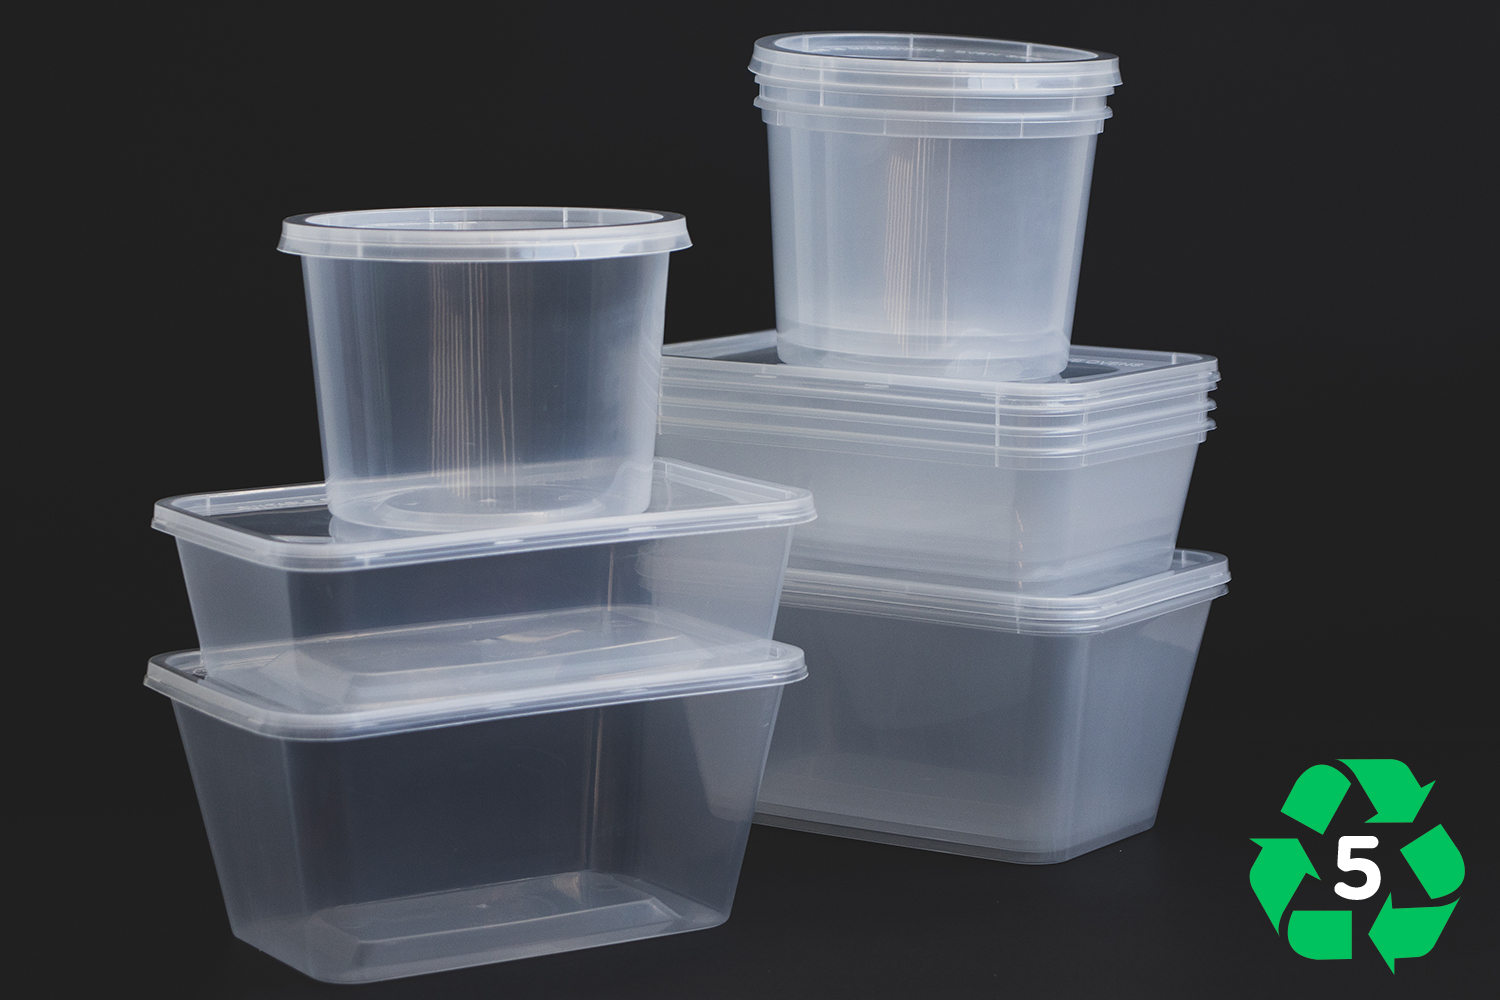 How to Recycle Used Food Storage Containers